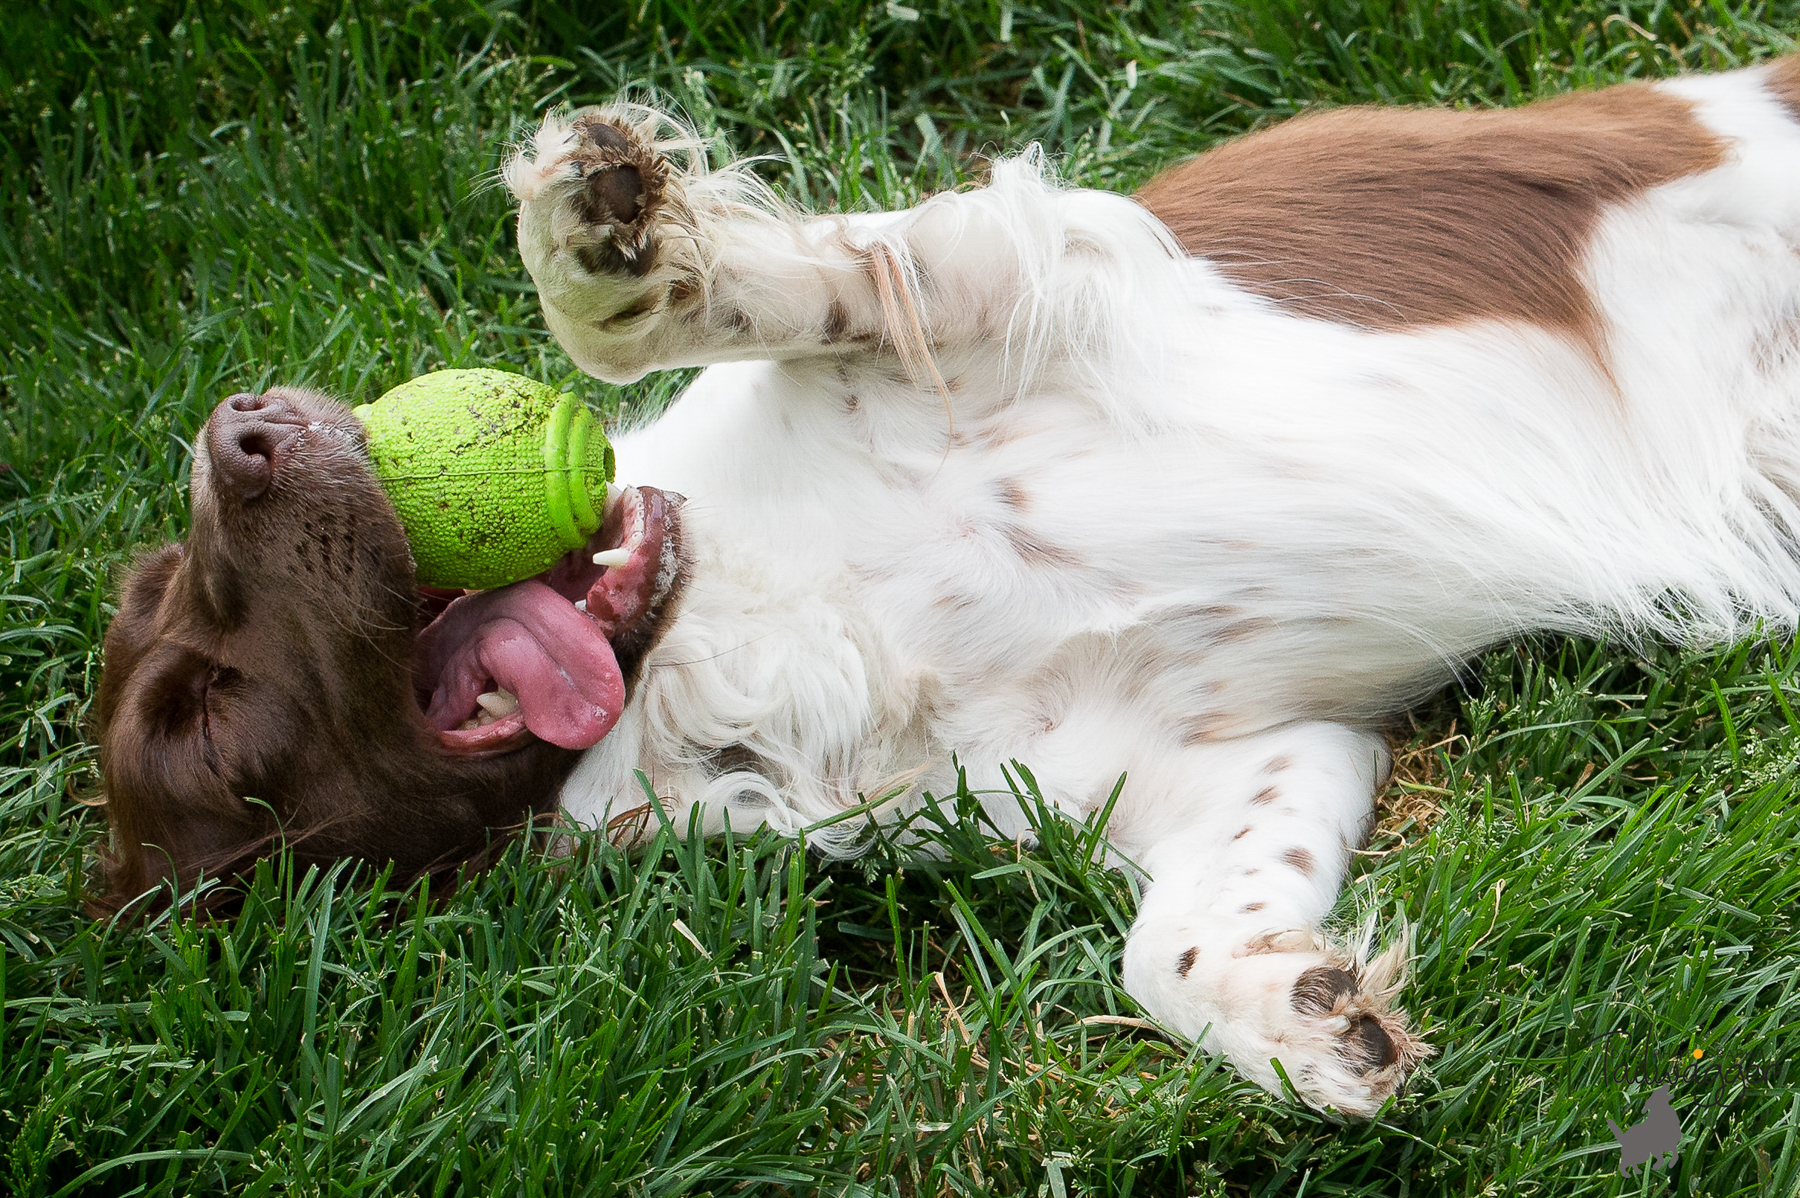 An English Springer Spaniel exhausted from playing, but not quite ready to call it quits.